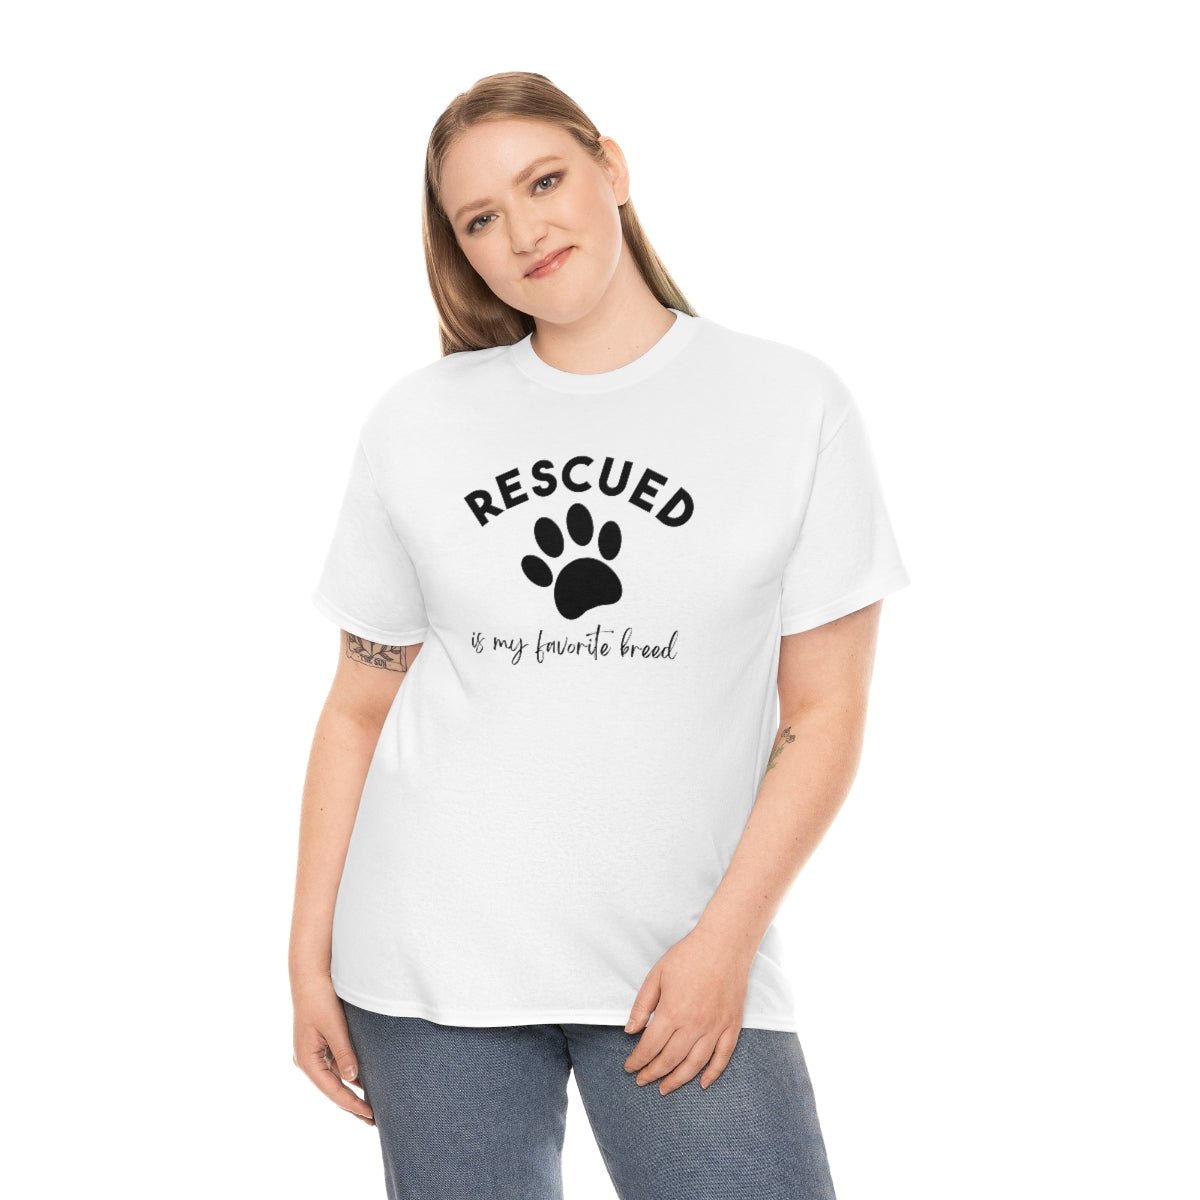 Rescued Is My Favorite Breed Paw | Text Tees - Detezi Designs-16203733790489053870